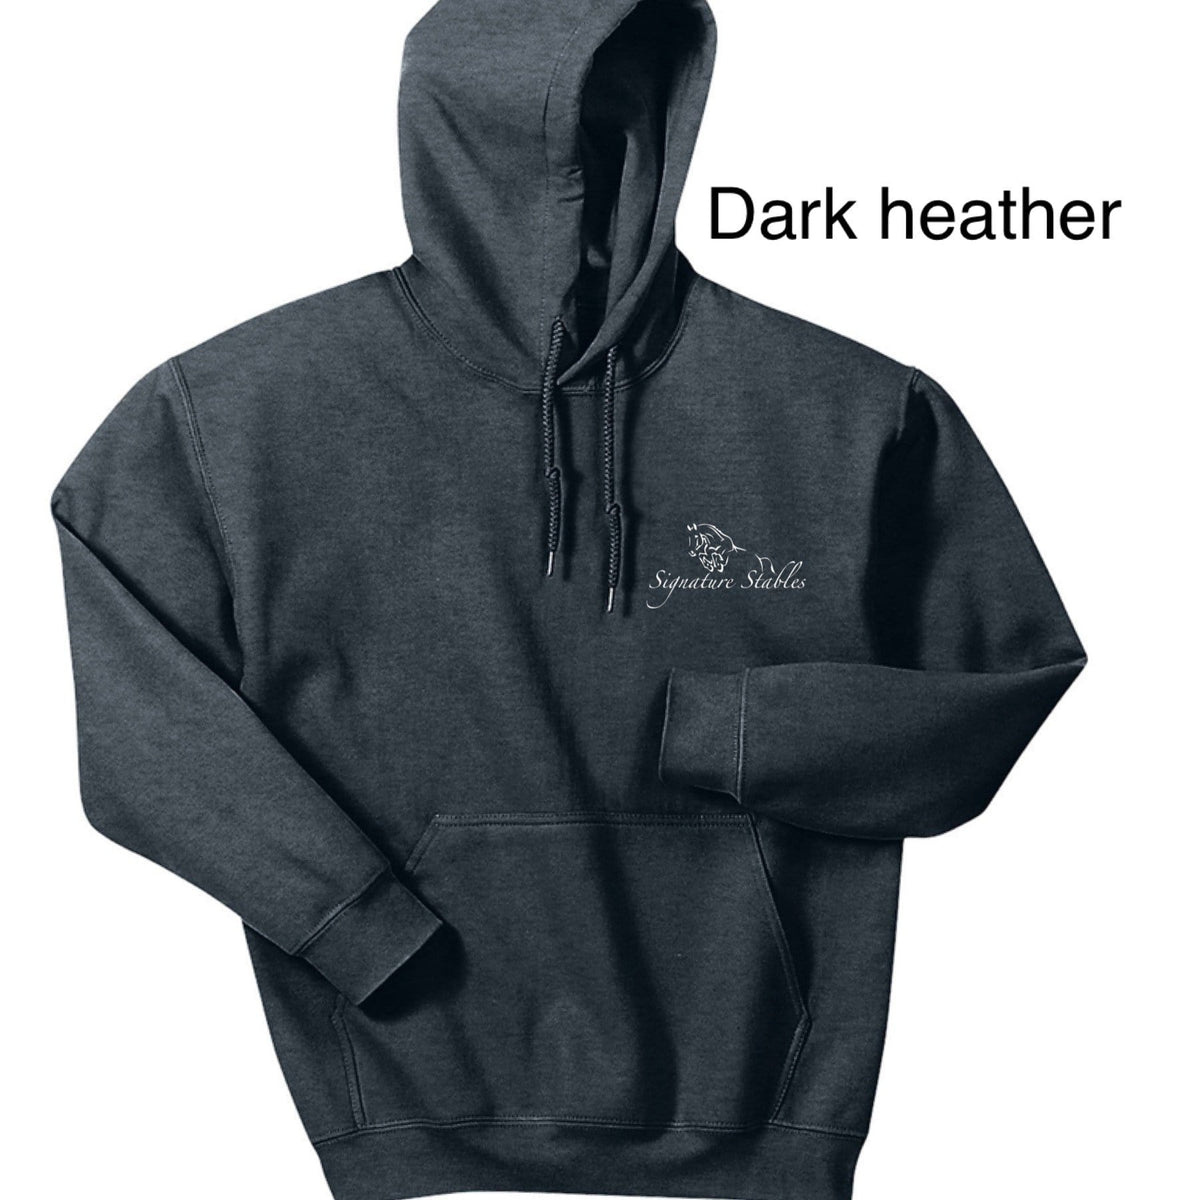 Equestrian Team Apparel Signature Stables Hoodies equestrian team apparel online tack store mobile tack store custom farm apparel custom show stable clothing equestrian lifestyle horse show clothing riding clothes horses equestrian tack store